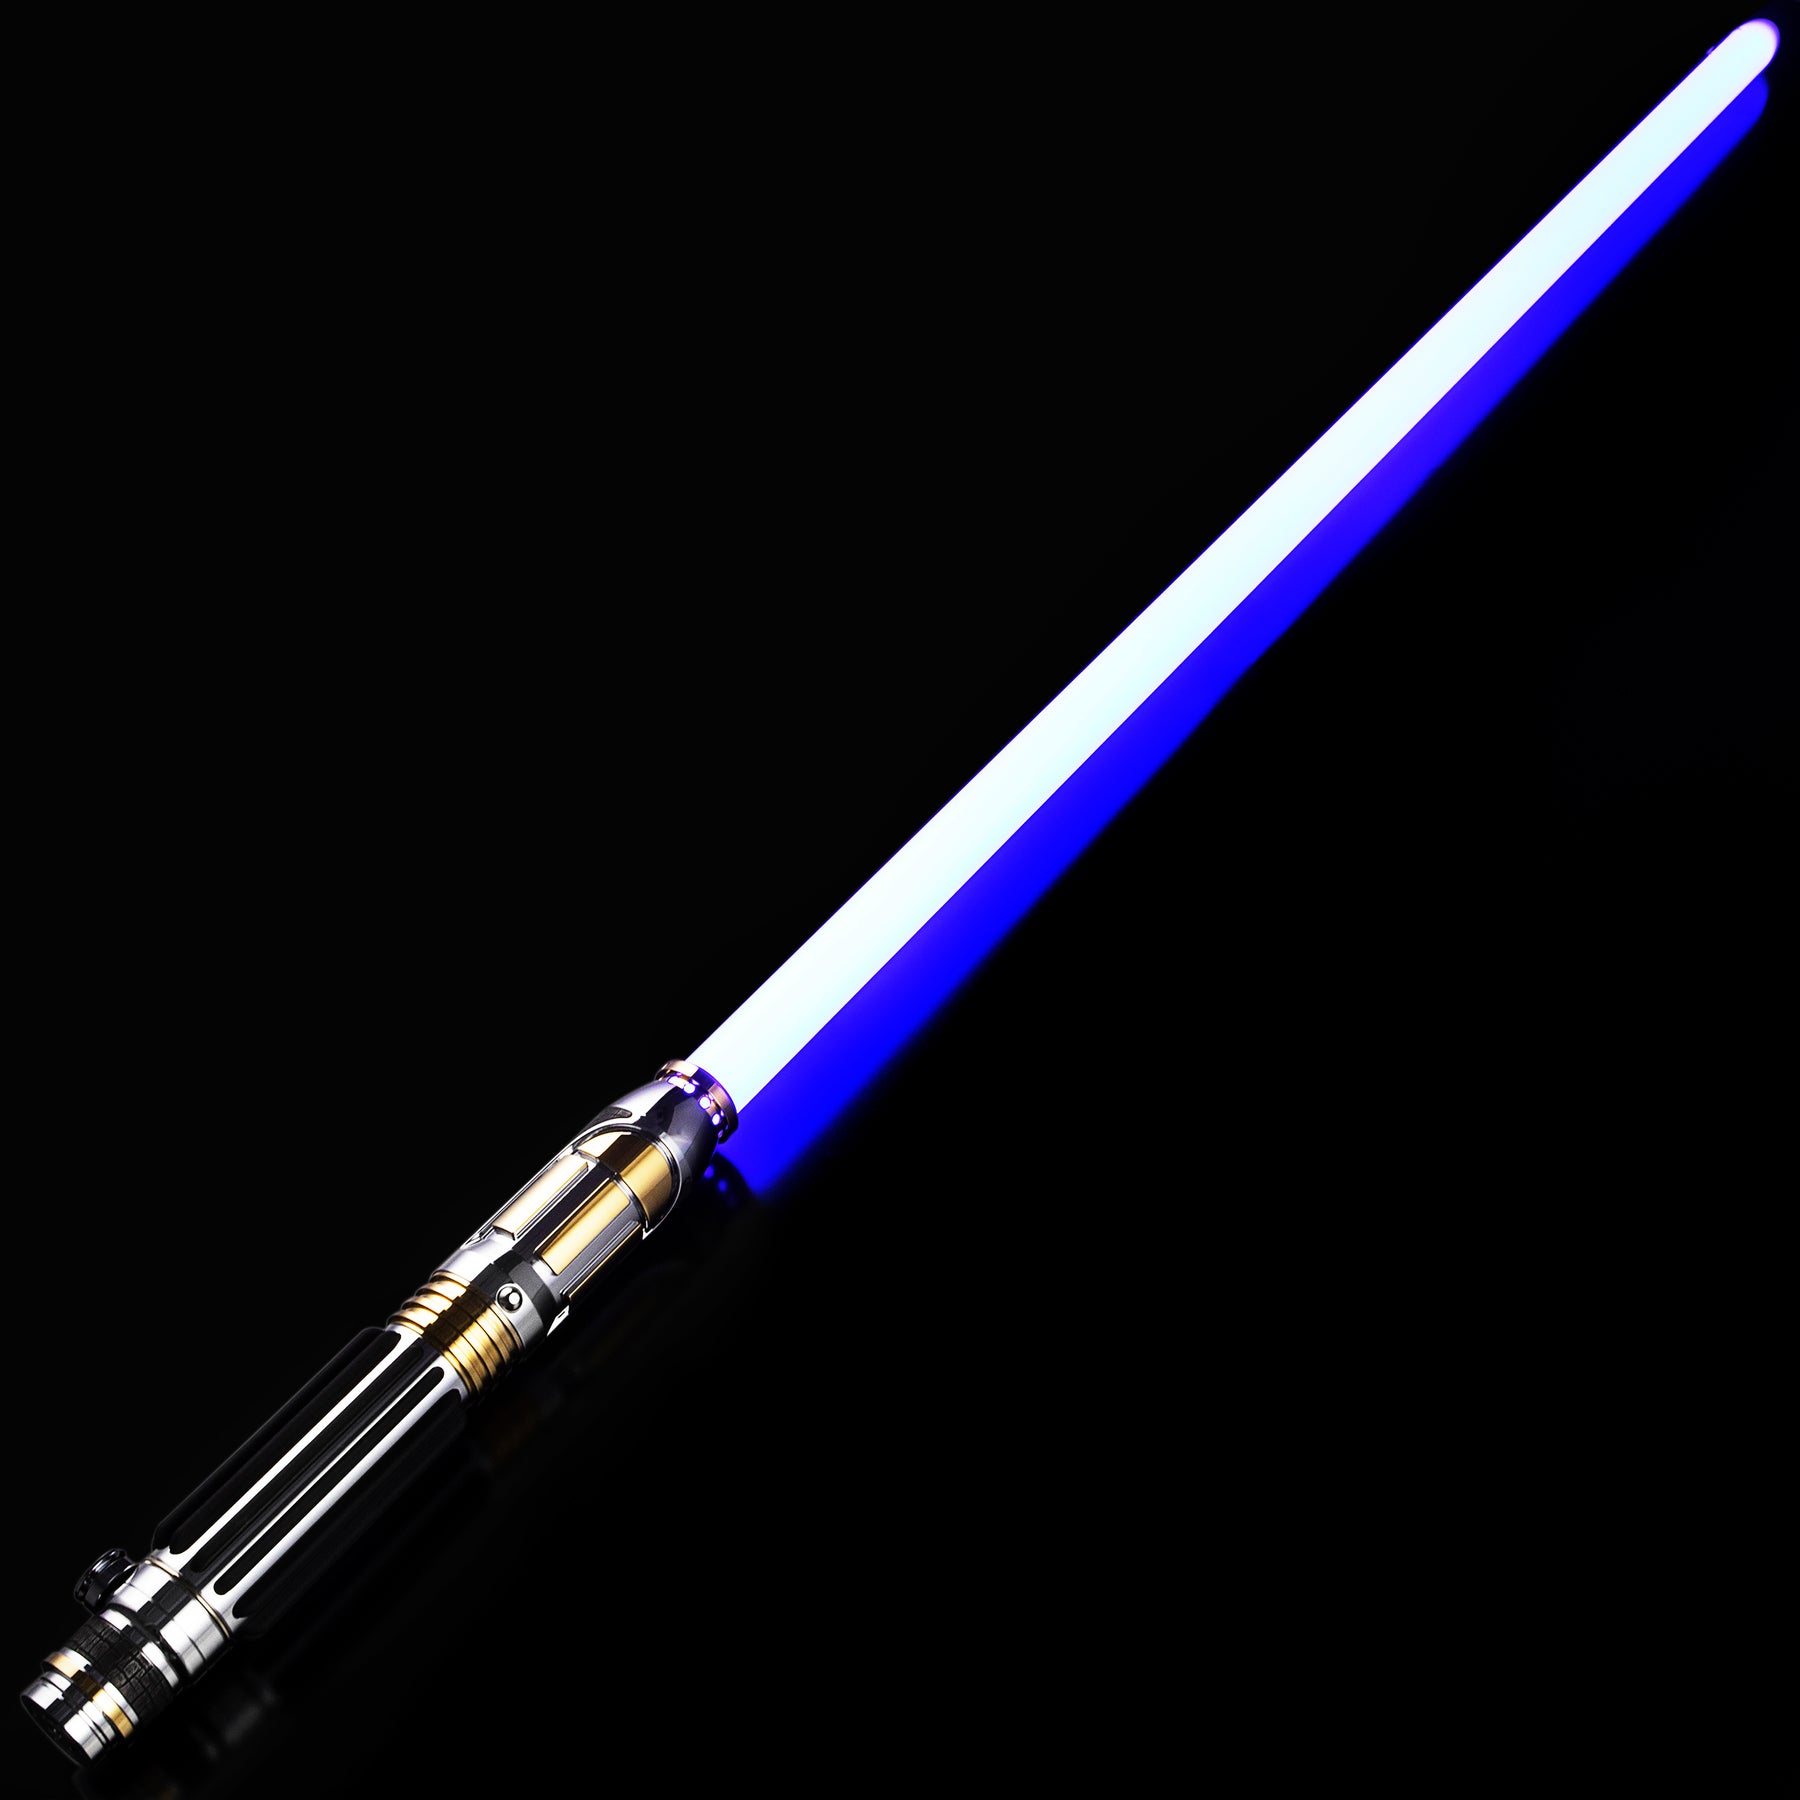 SaberCustom Dueling Lightsaber Infinite Colors Changing Lightsaber Smooth Swing NO068